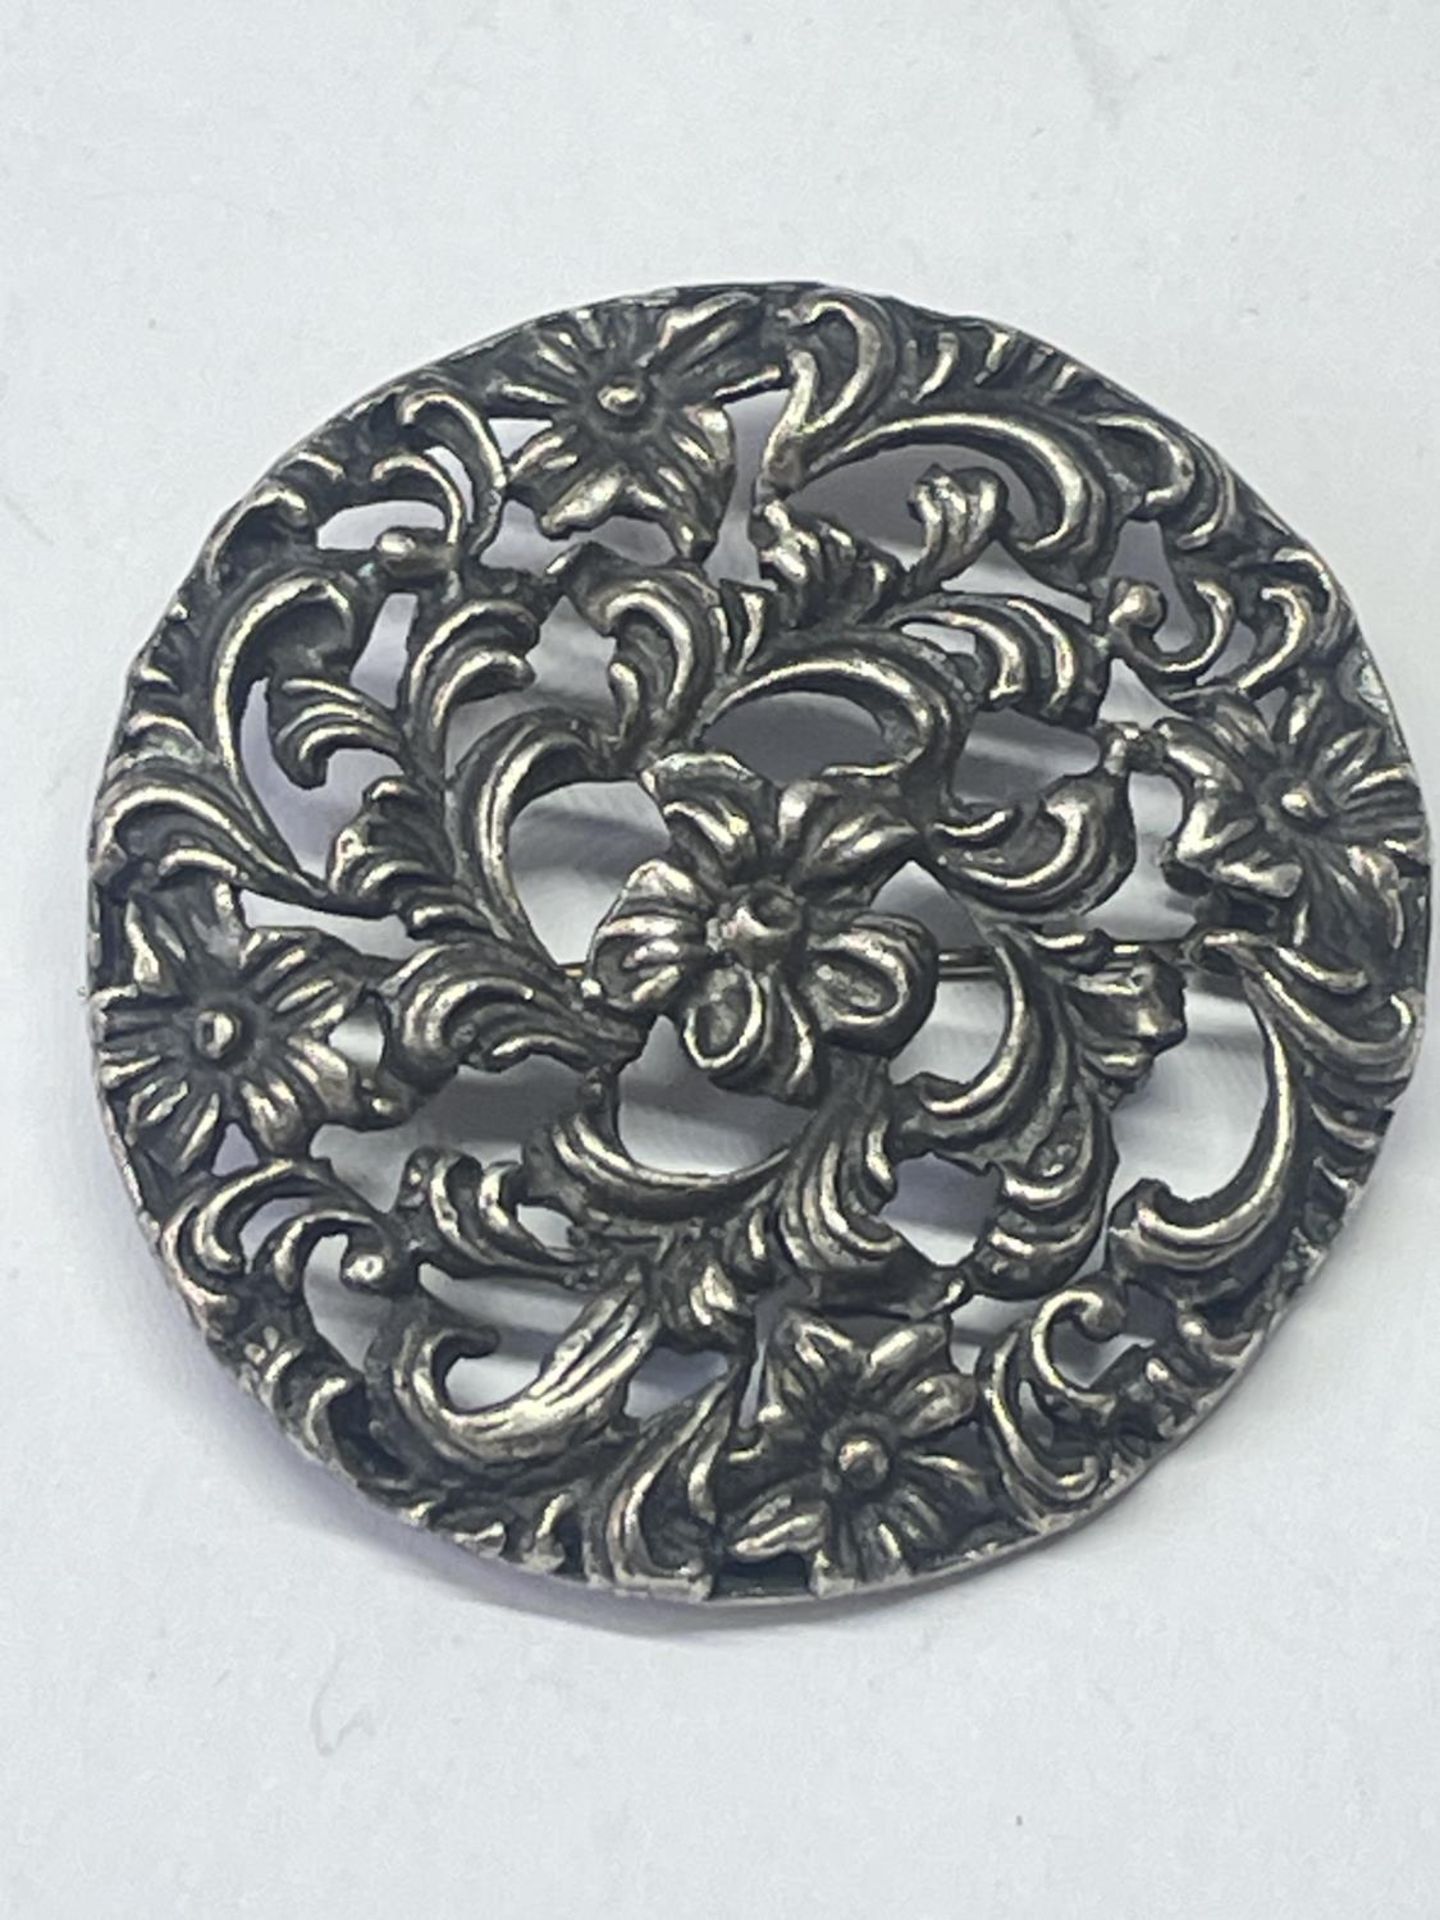 A SILVER BROOCH IN A PRESENTATION BOX - Image 2 of 3